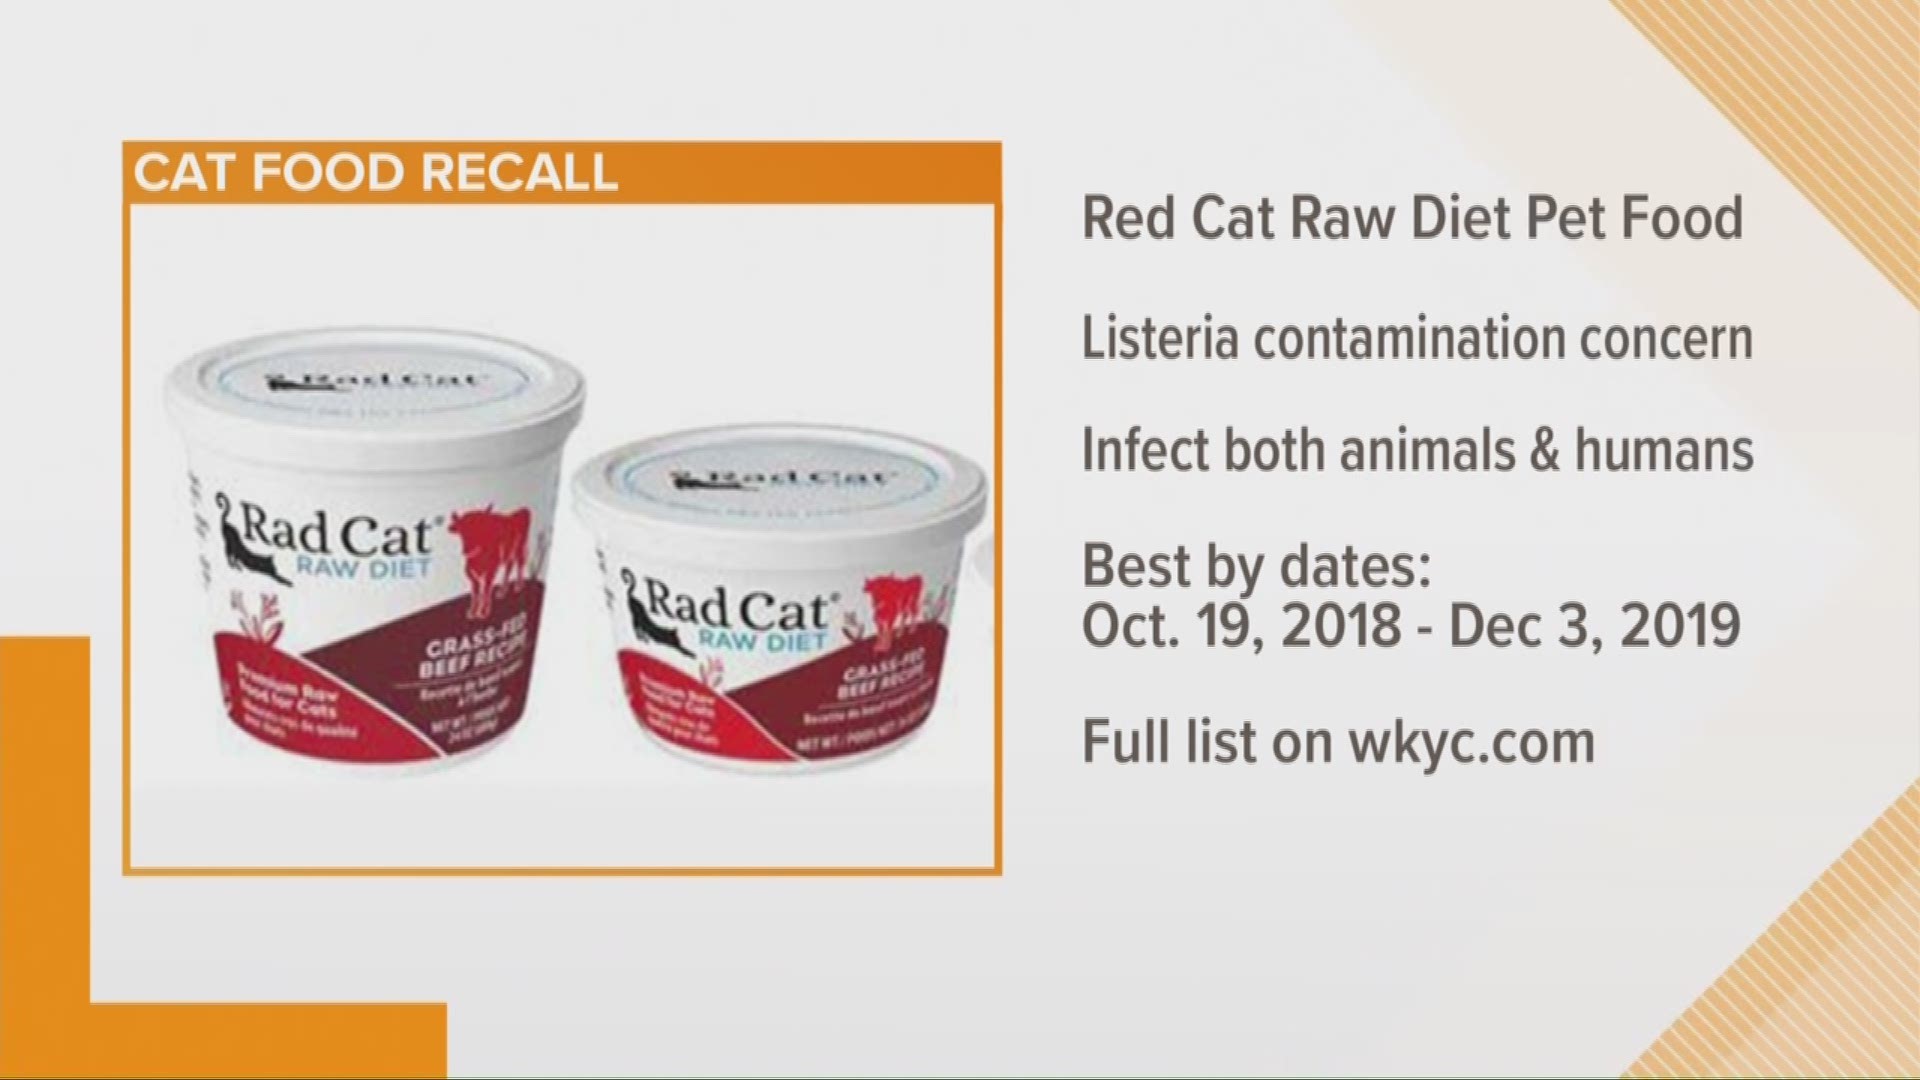 Aug. 22, 2018: Several varieties of Rad Cat Raw Diet pet food are being recalled because of possible listeria contamination that could affect both animals and humans.